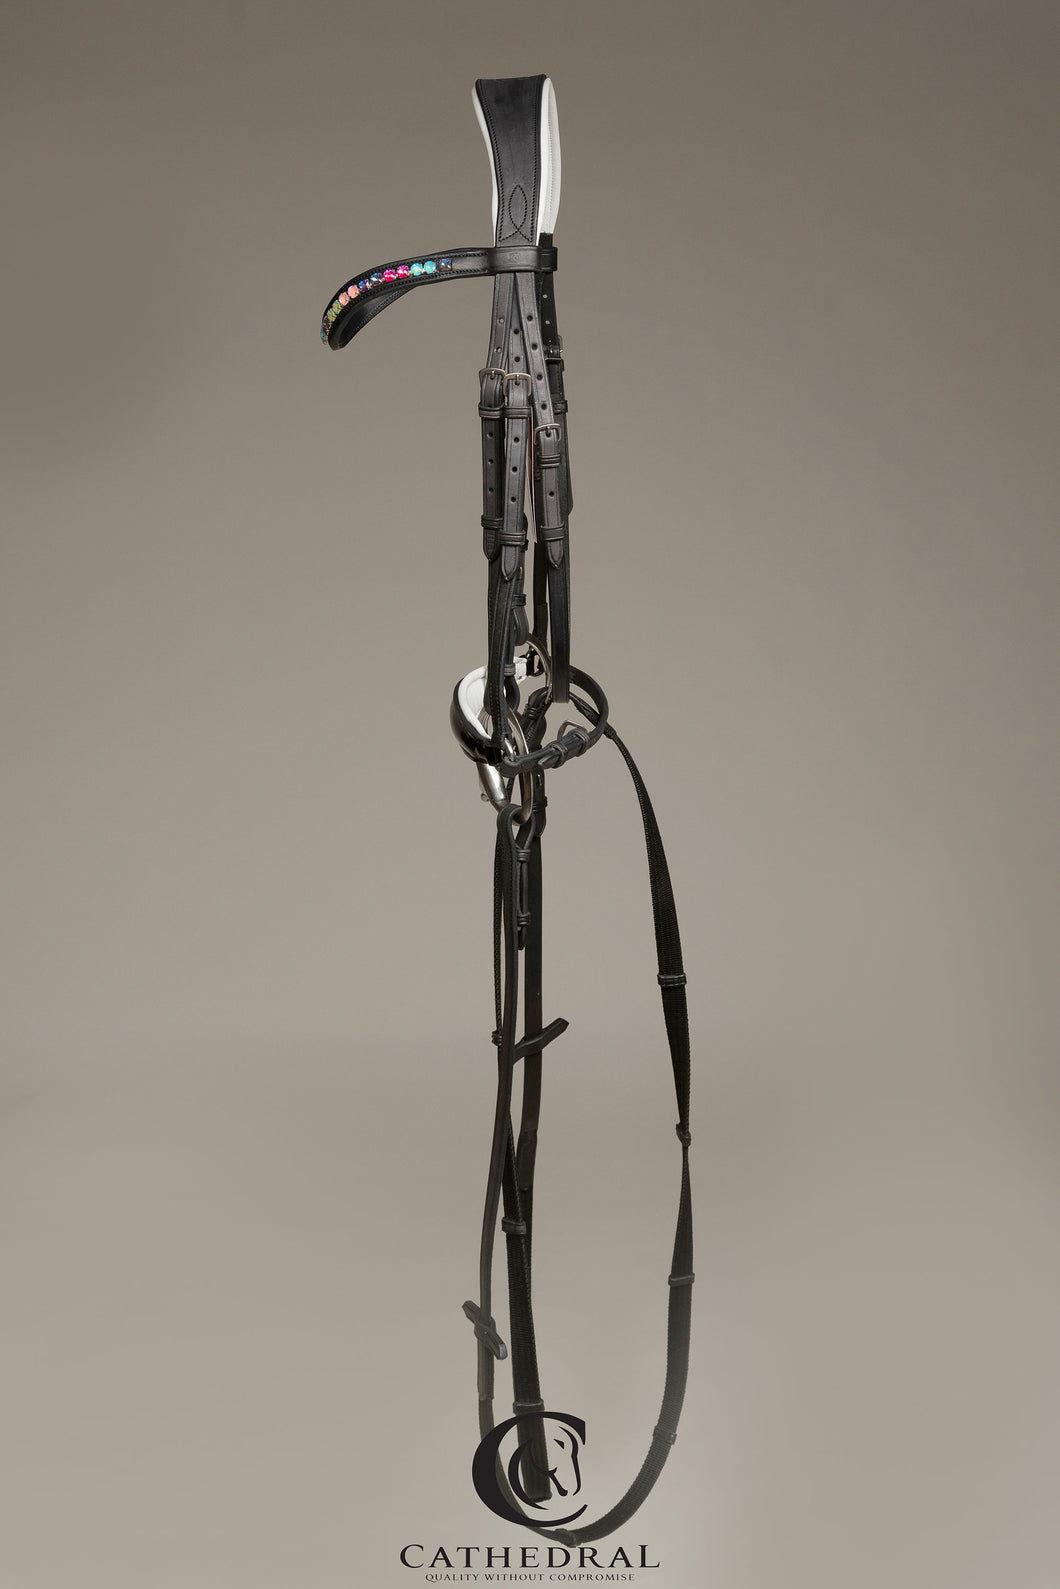 EDLINGTON - Black snaffle bridle with a white padded drop noseband and rainbow crystal styled browband